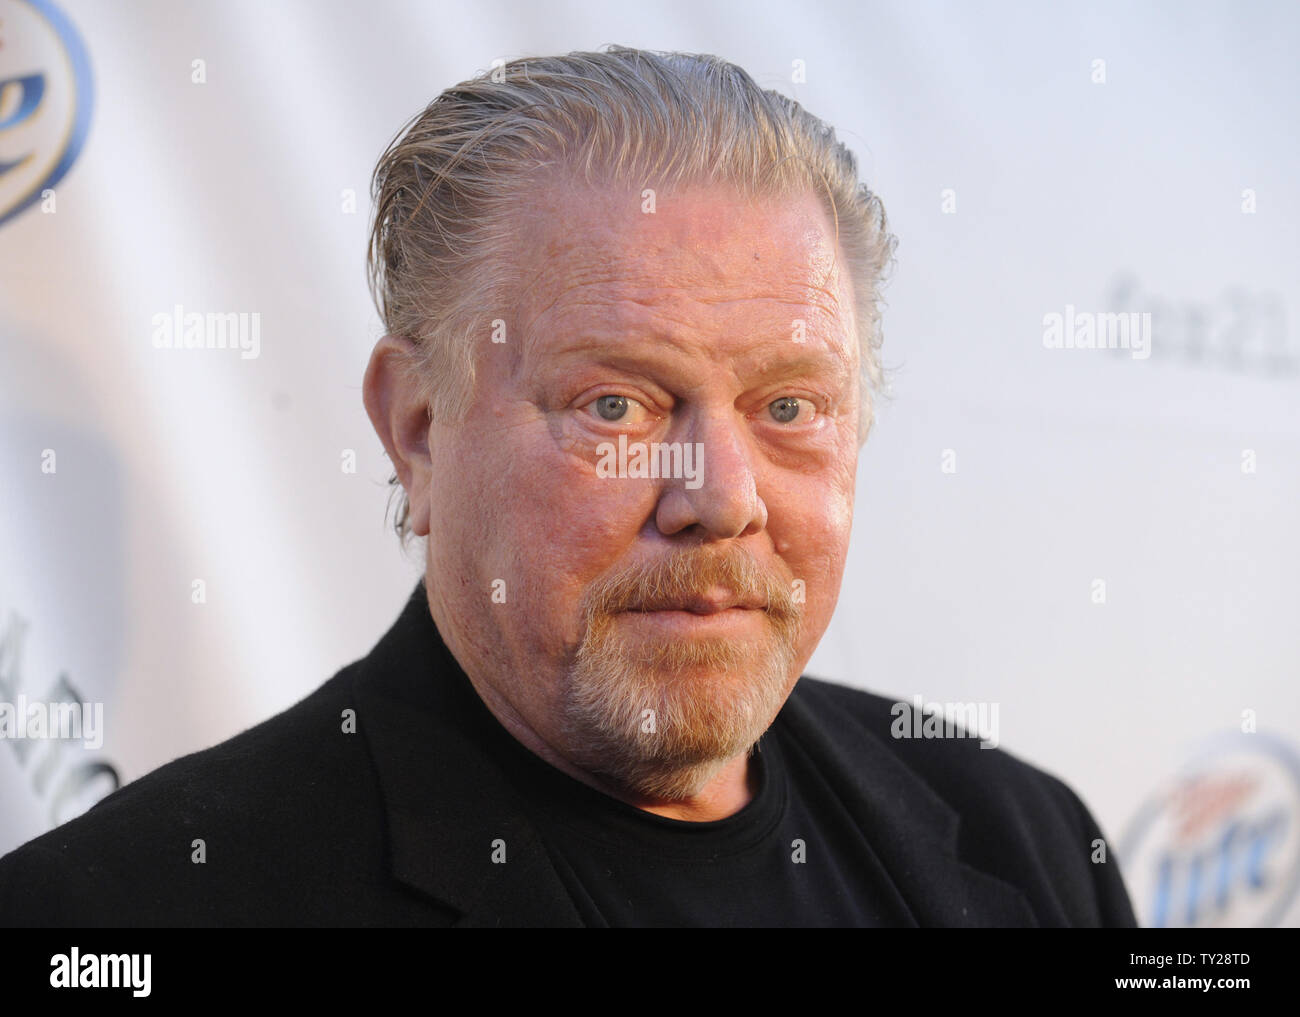 Cast member William Lucking attends the Sons of Anarchy, Season 4 premiere screening at the Arclight Theatre in the Hollywood section of Los Angeles on August 30, 2011.      UPI/Phil McCarten Stock Photo